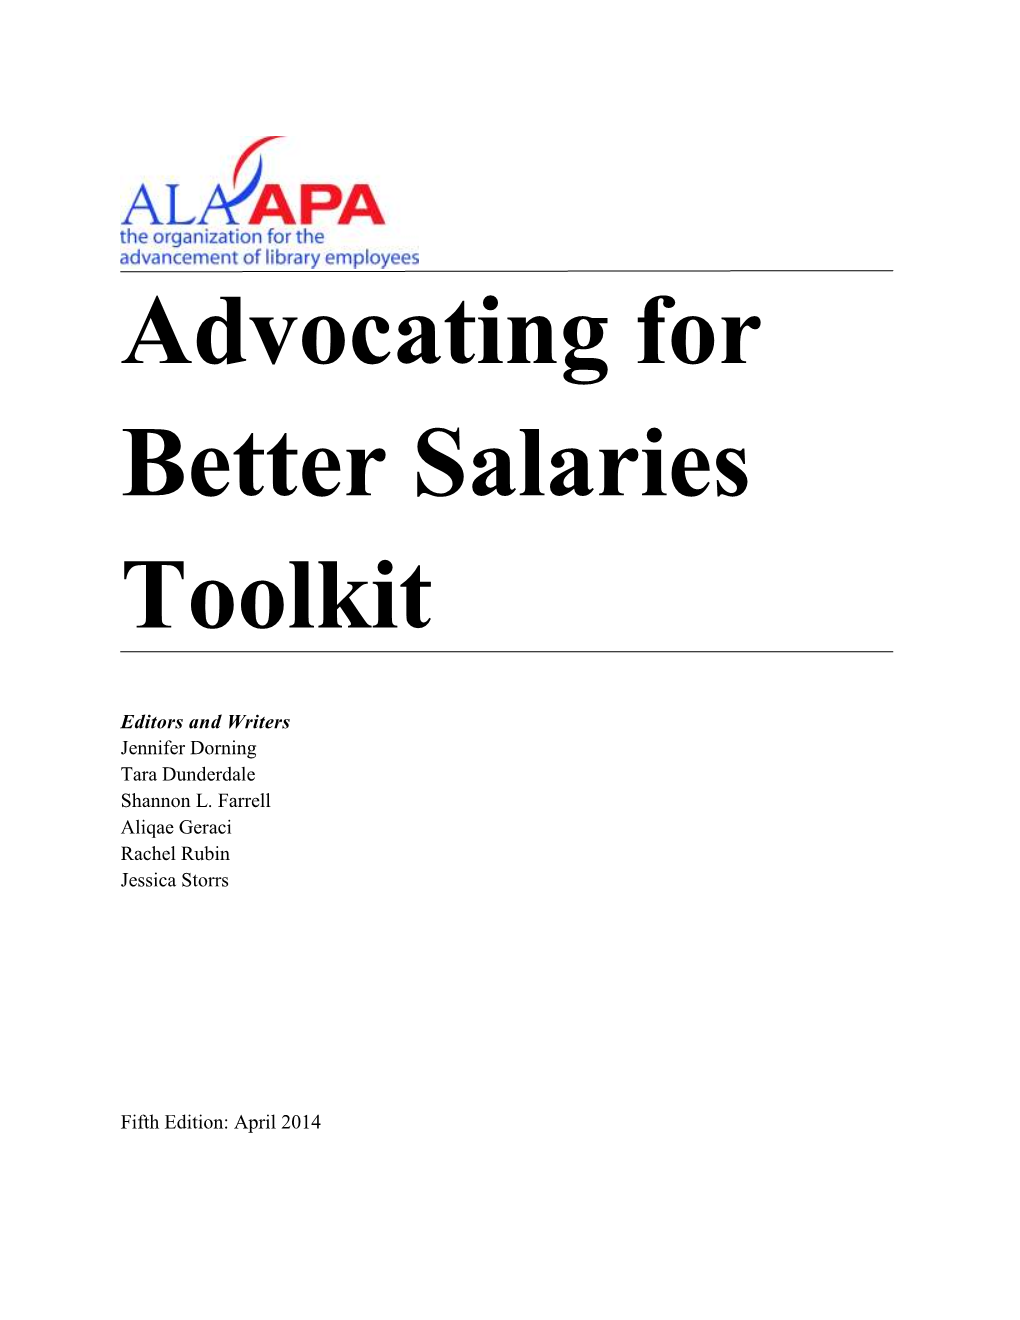 Advocating for Better Salaries Toolkit